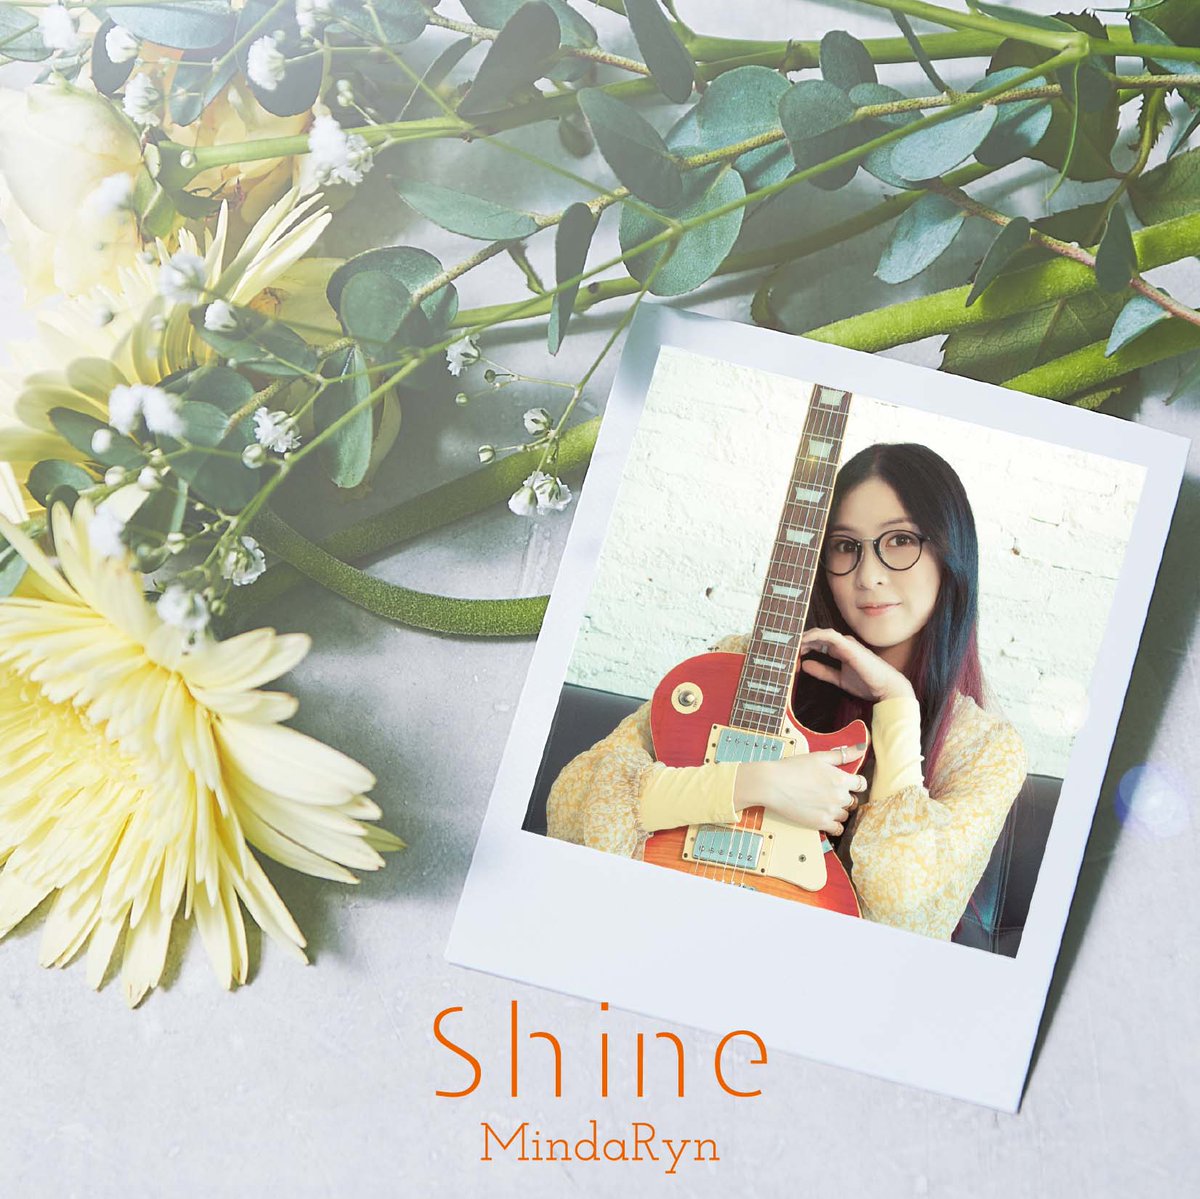 Cover for『MindaRyn - Call out my name (English Version)』from the release『Shine』